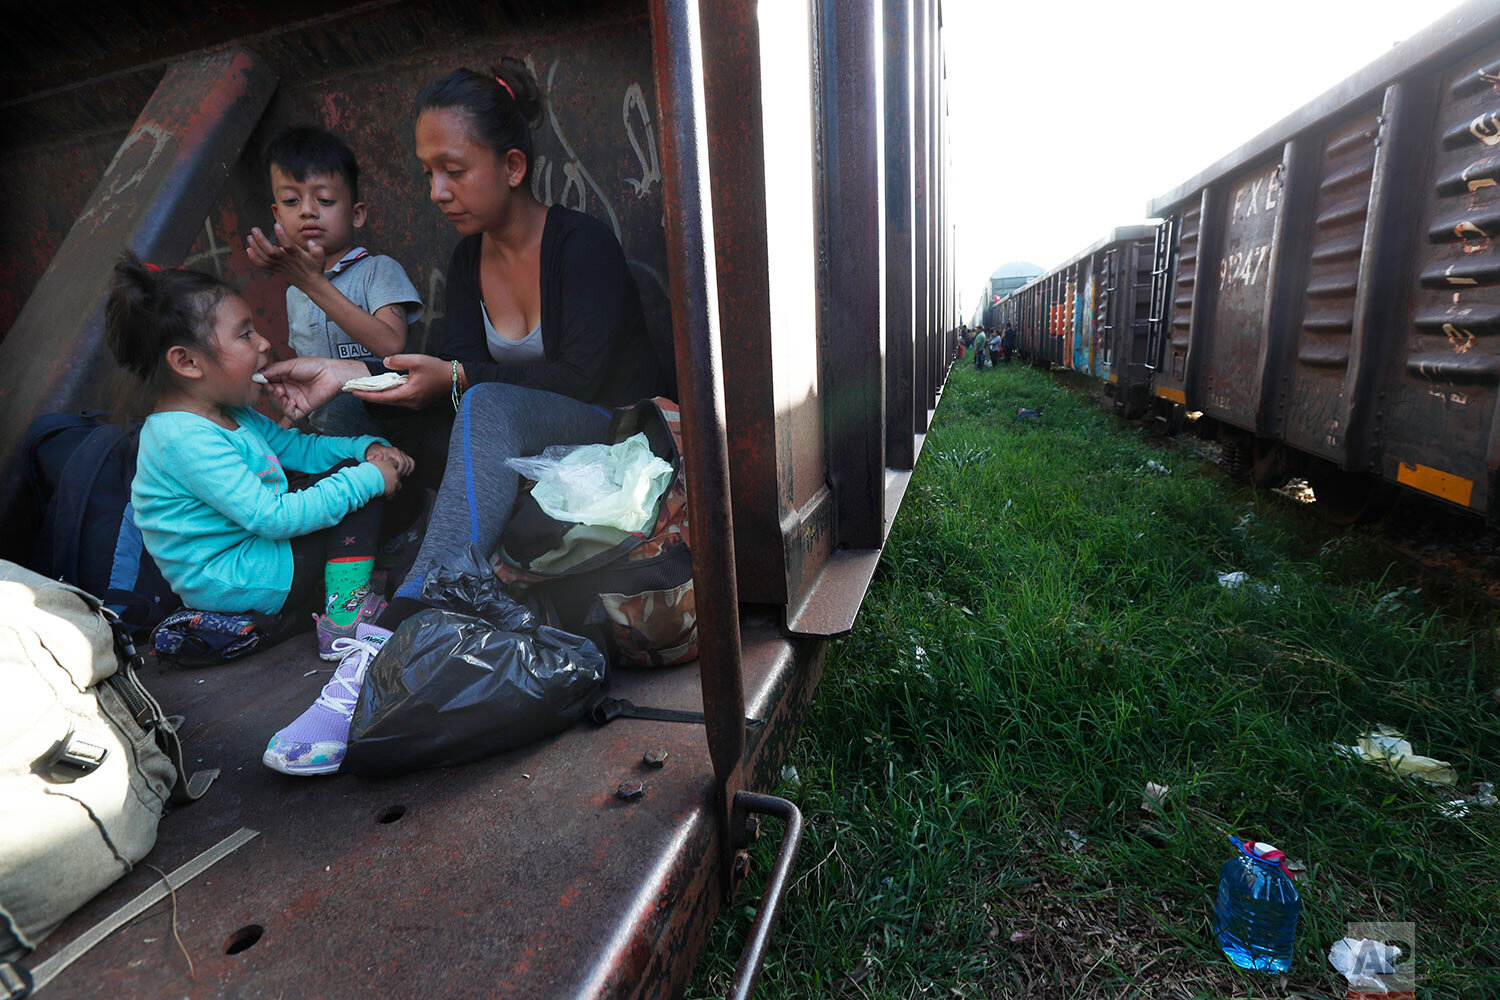  A migrant mother feeds her children in a freight train in Palenque, Chiapas state, Mexico, as they travel north on June 24, 2019. (AP Photo/Marco Ugarte) 